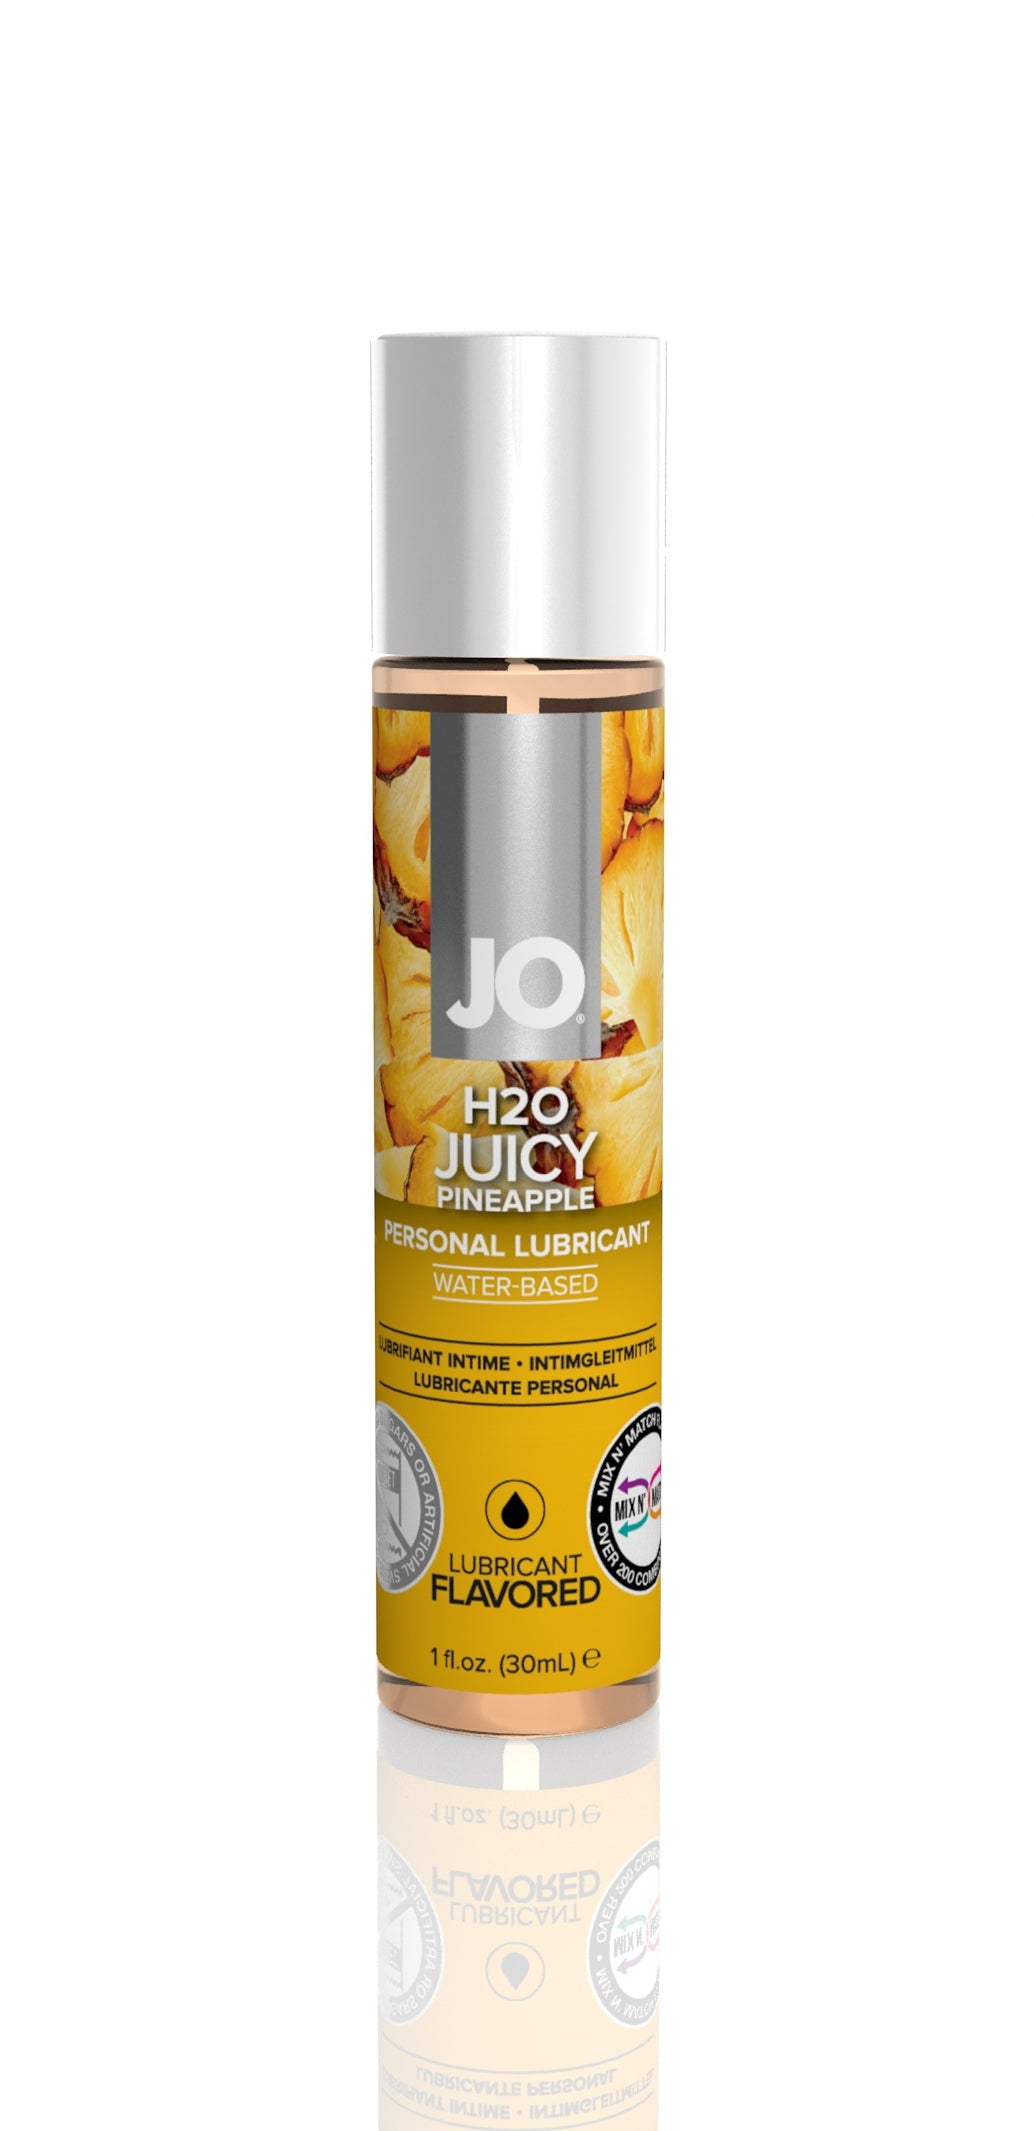 System JO H2O Flavored Juicy Pineapple Personal Lubricant Oral Sex Lube 30ml